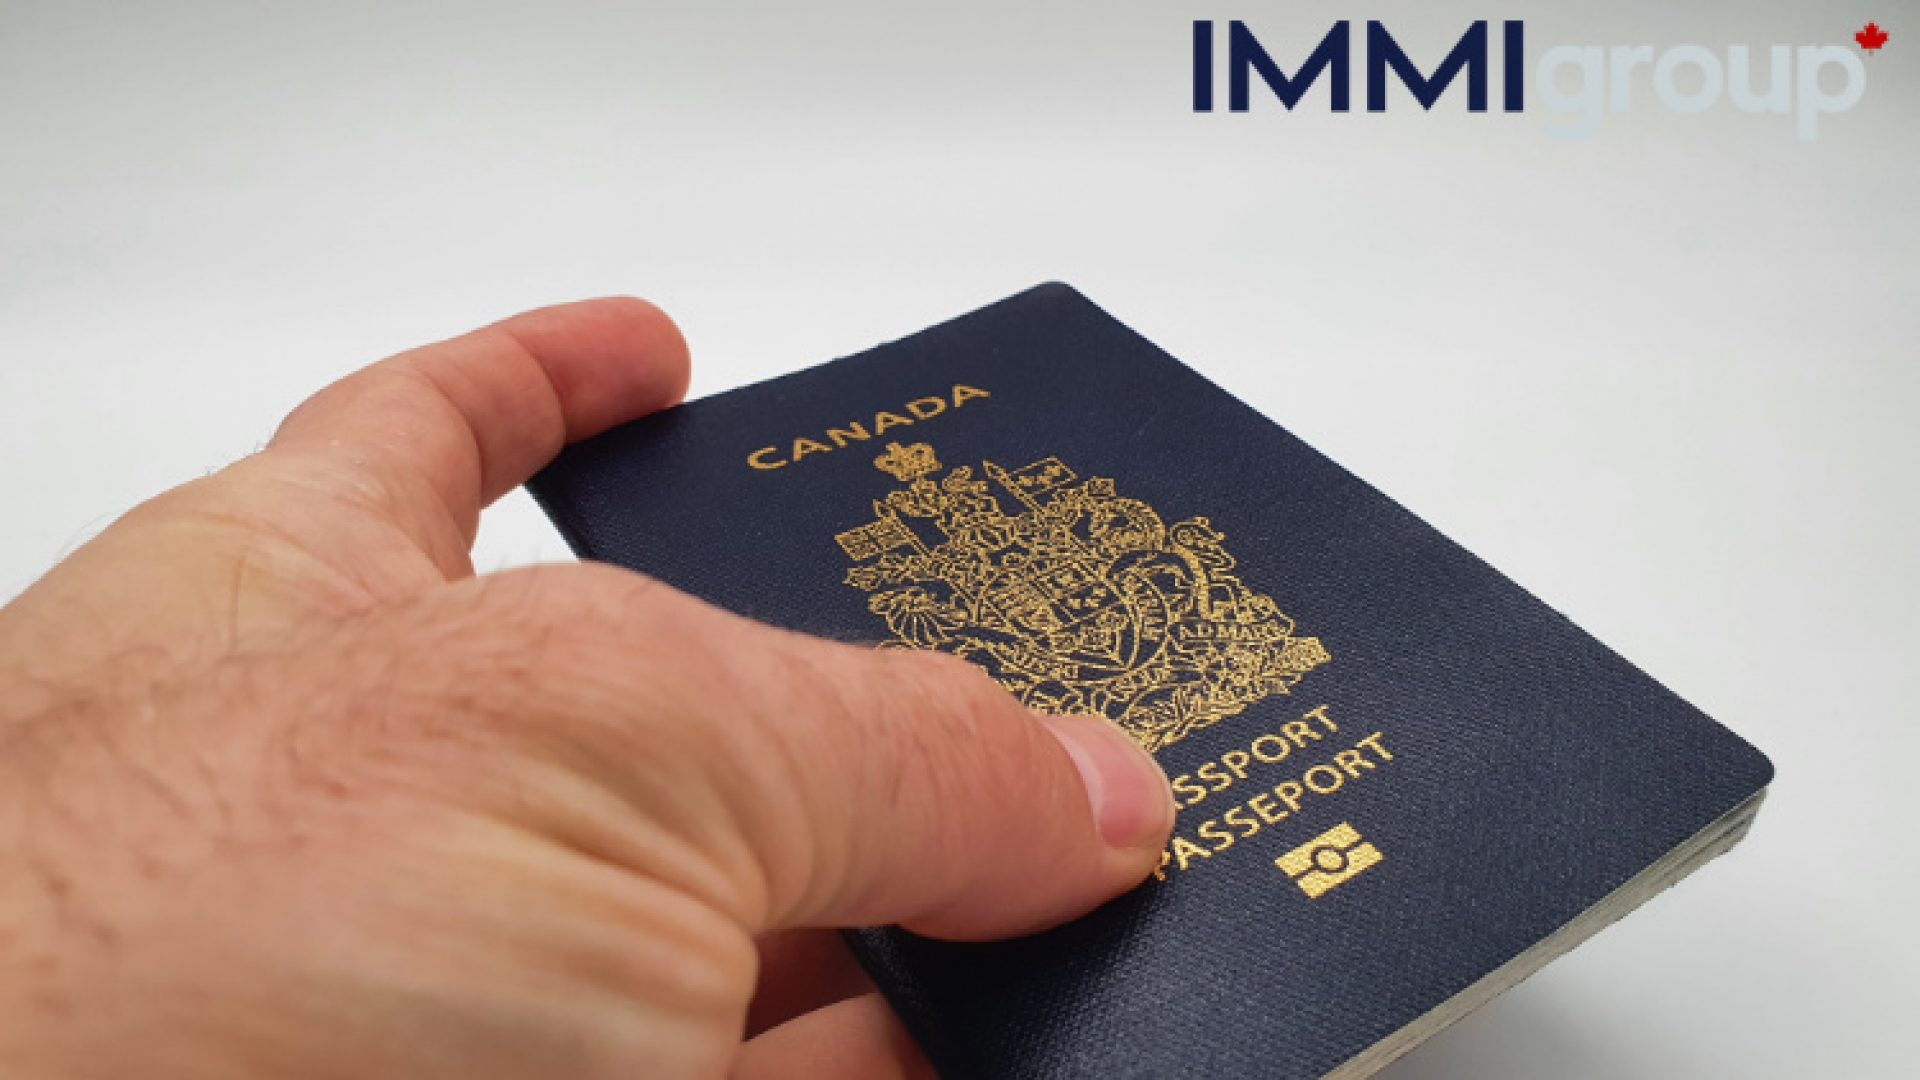 shows a hand holding a Canadian passport. It the fist passport from Canada.